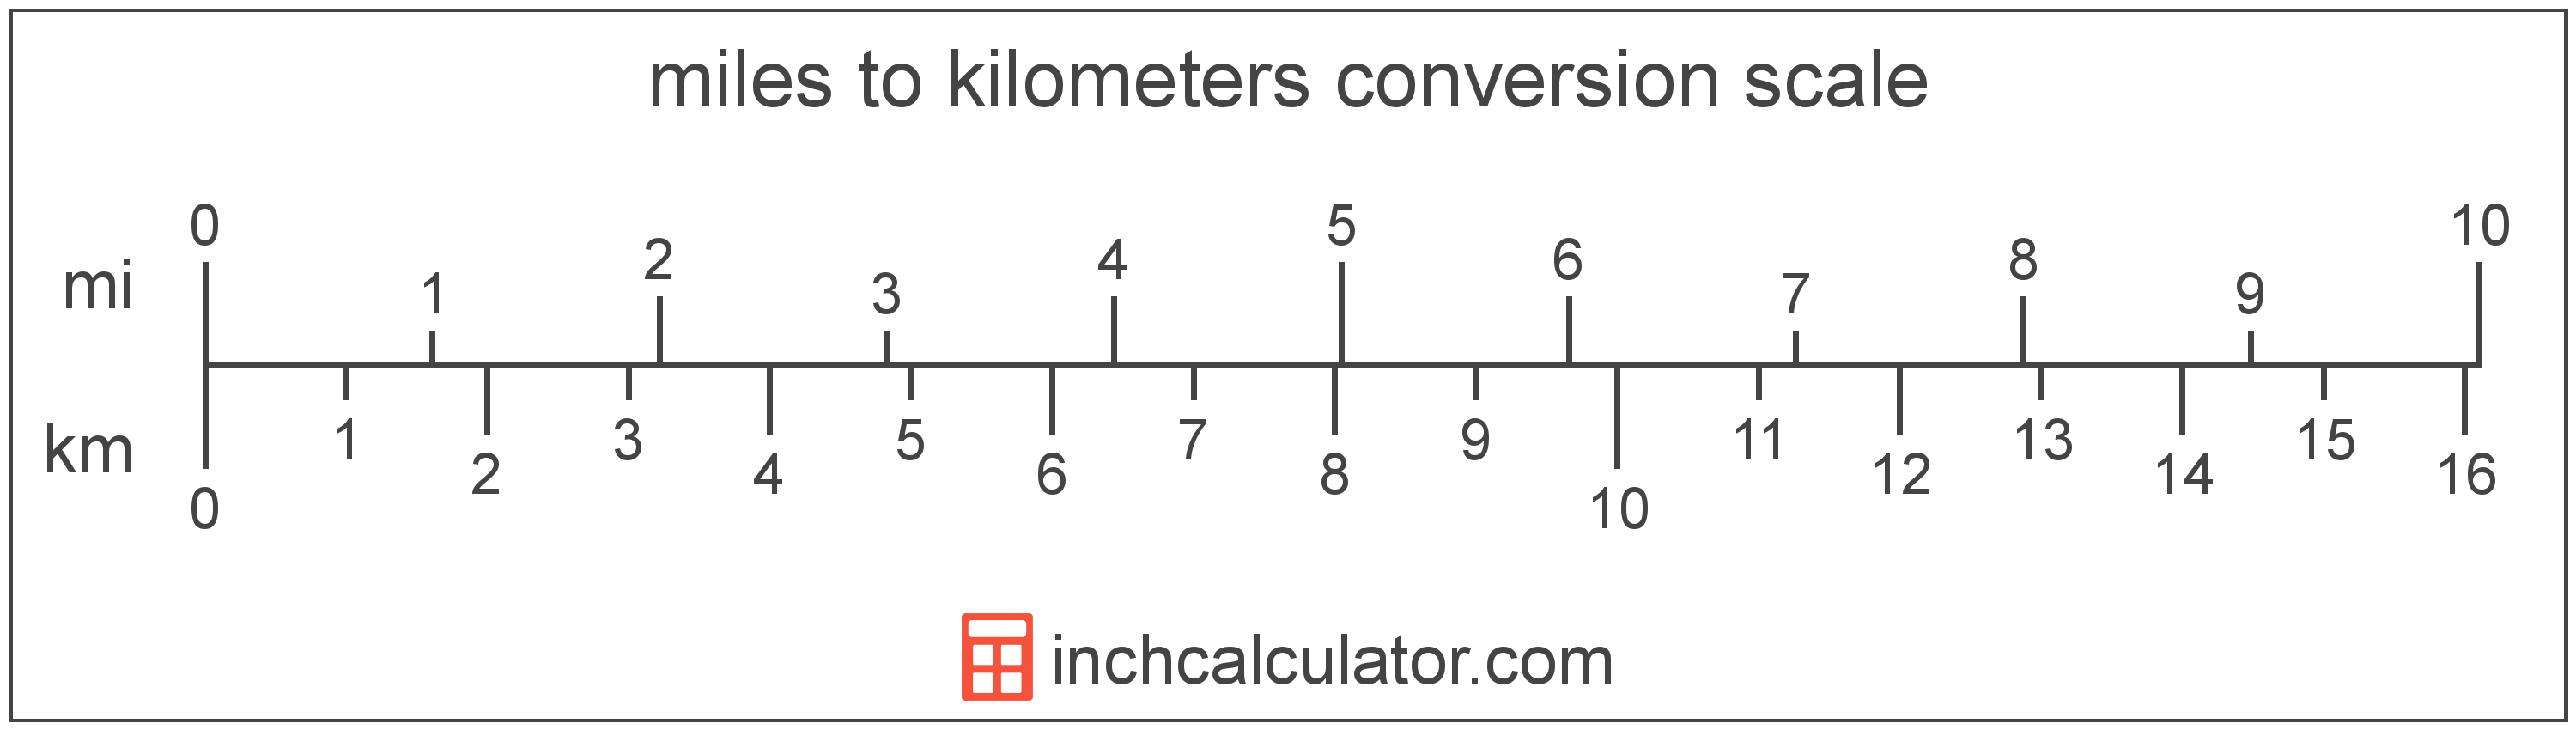 conversion scale showing kilometers and equivalent miles length values